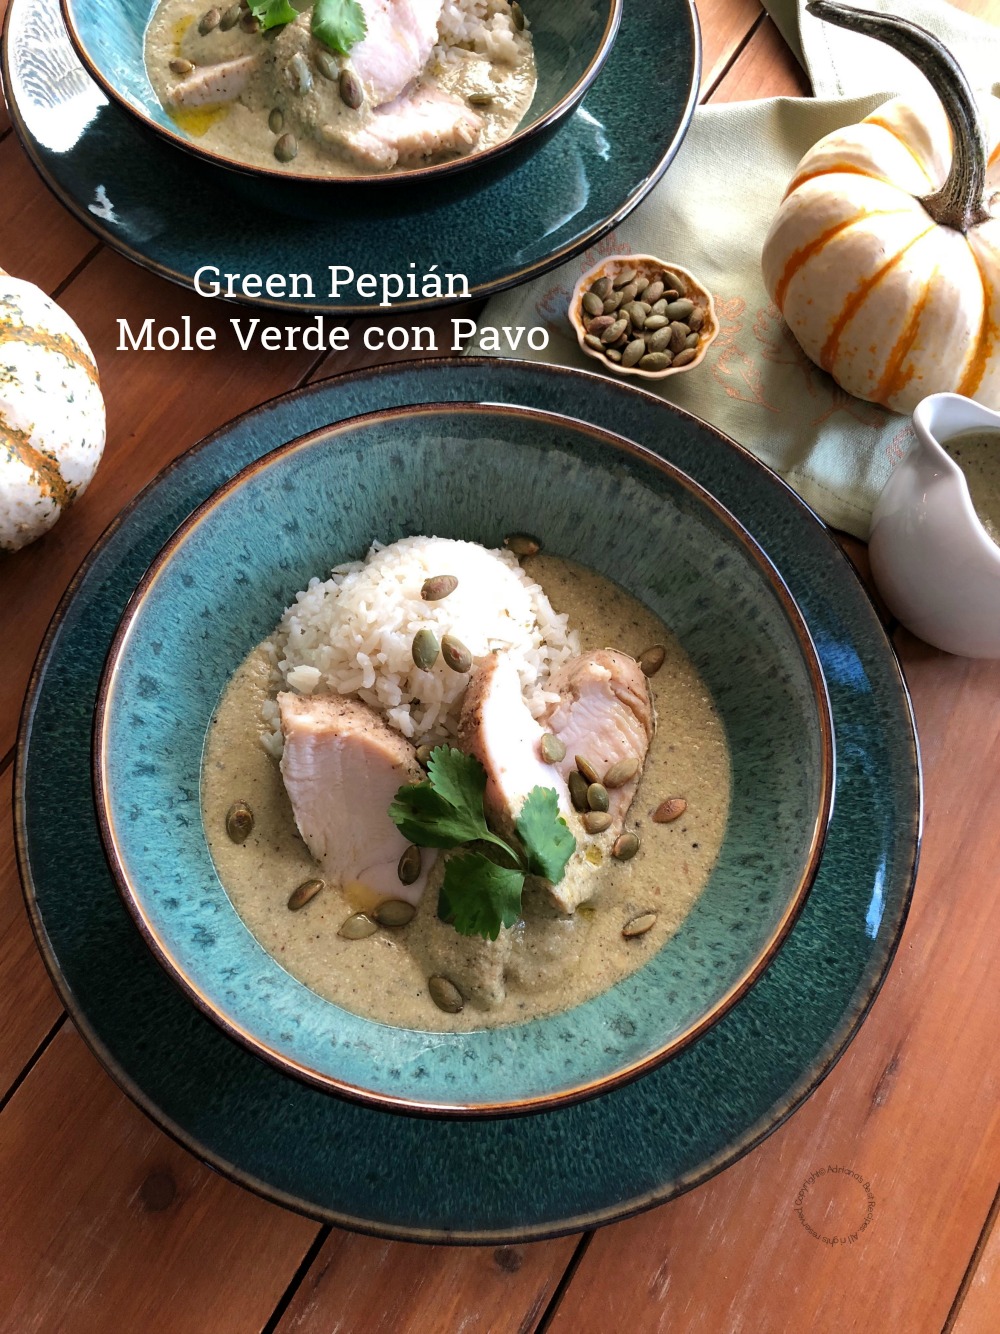 Green pepian or also called mole verde a classic Mexican dish